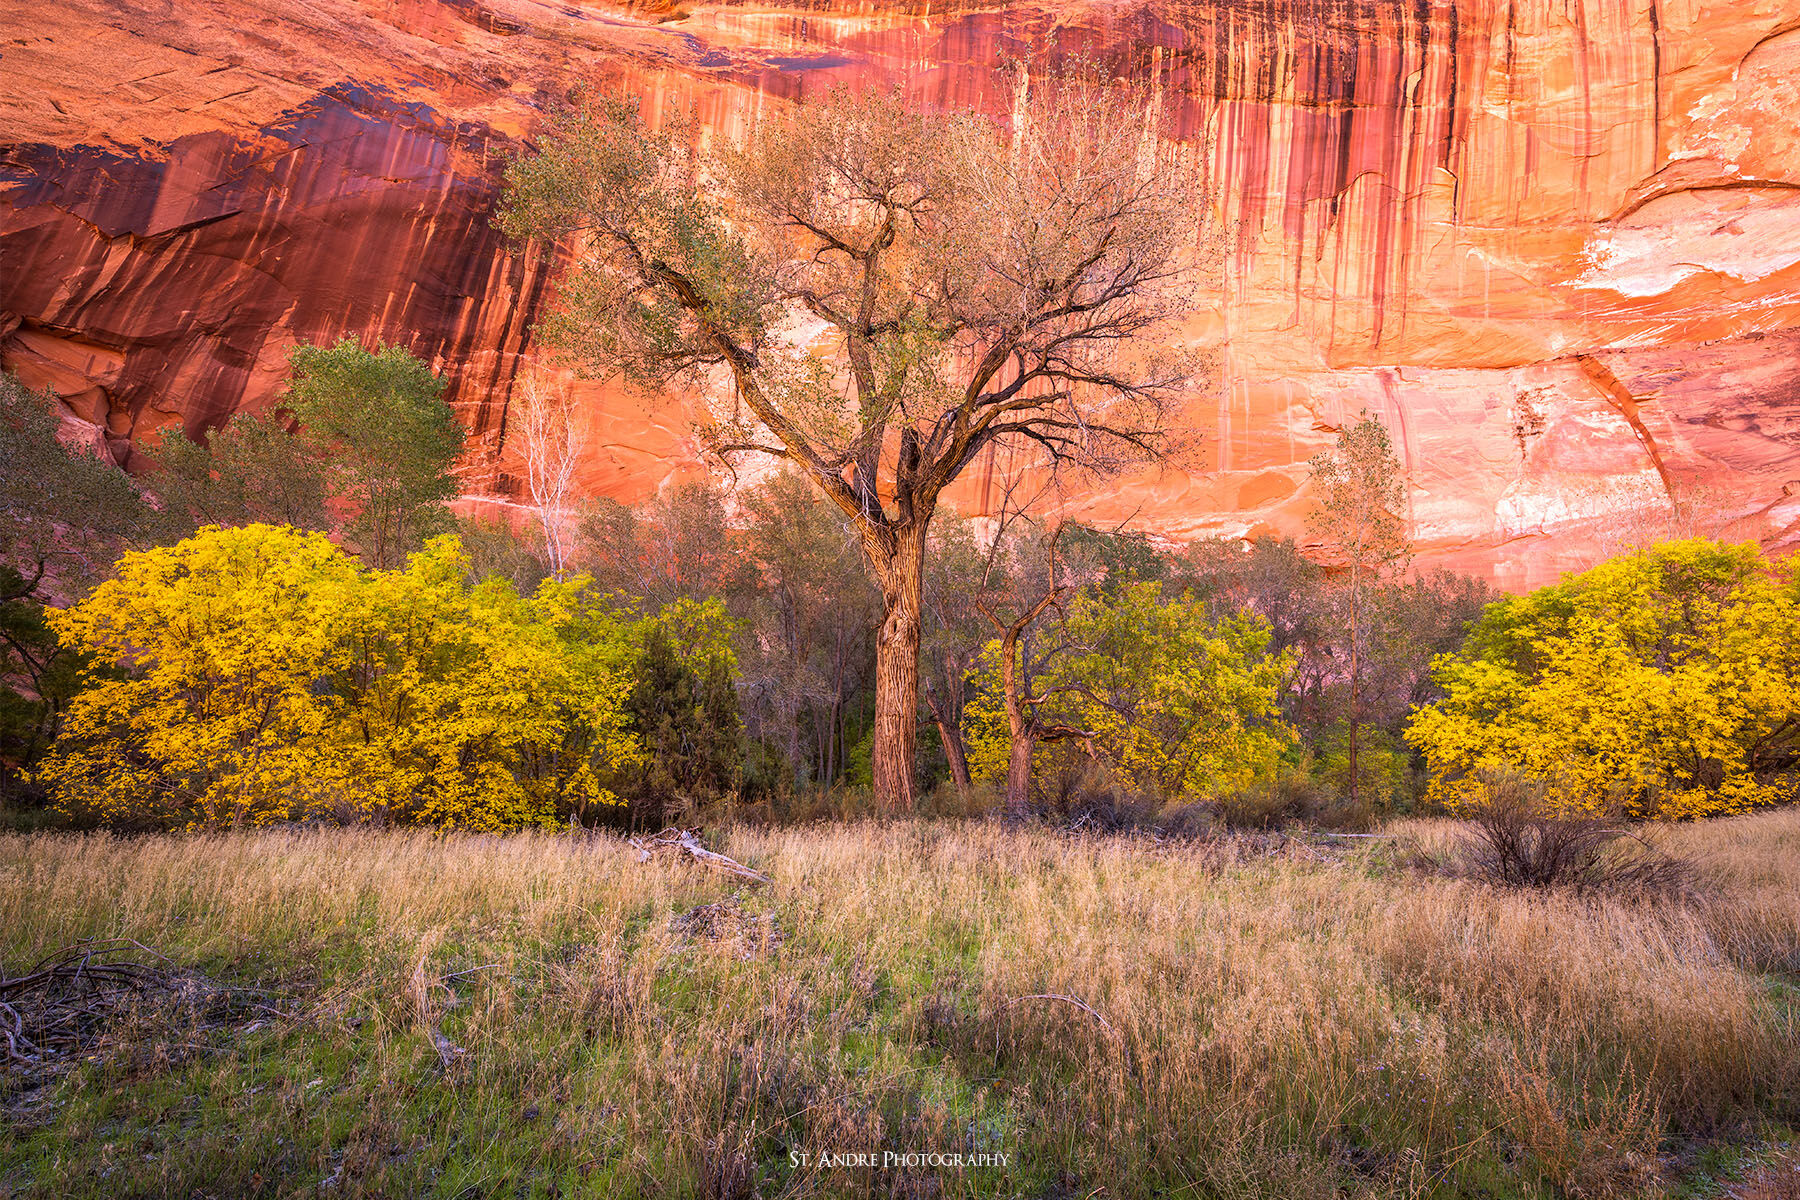 A single large cottonwood tree with no leaves reaches high above a floor of box elder trees with fall colored leaves. The entire scene is set in a canyon